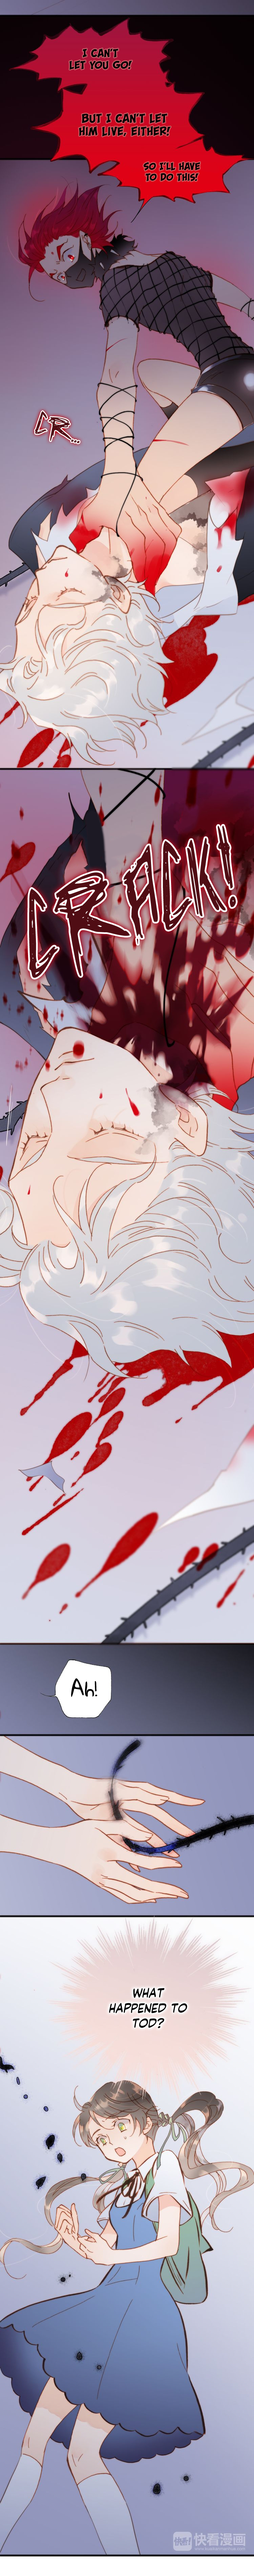 Soundless Cosmos Ch. 12 A Bloody Face